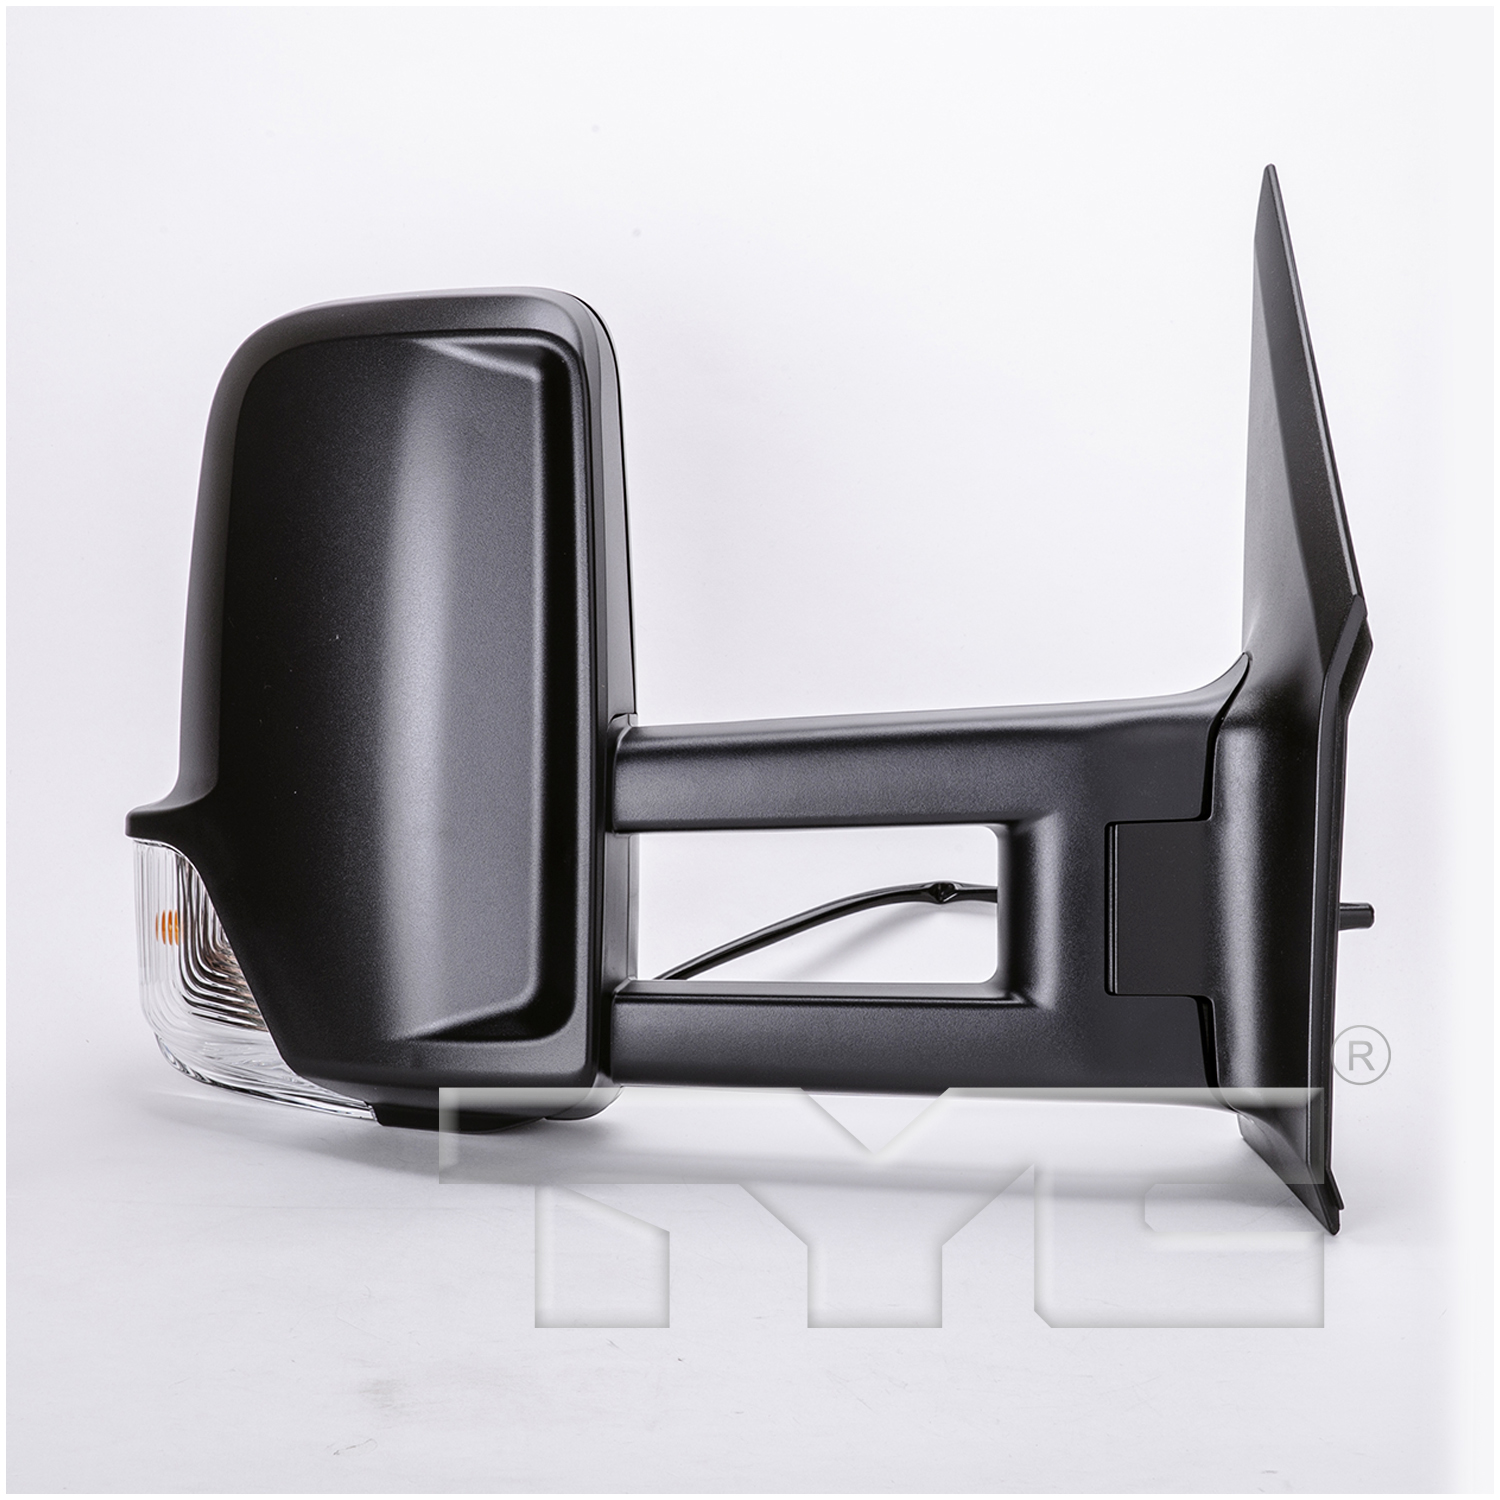 Aftermarket MIRRORS for DODGE - SPRINTER 2500, SPRINTER 2500,07-09,RT Mirror outside rear view